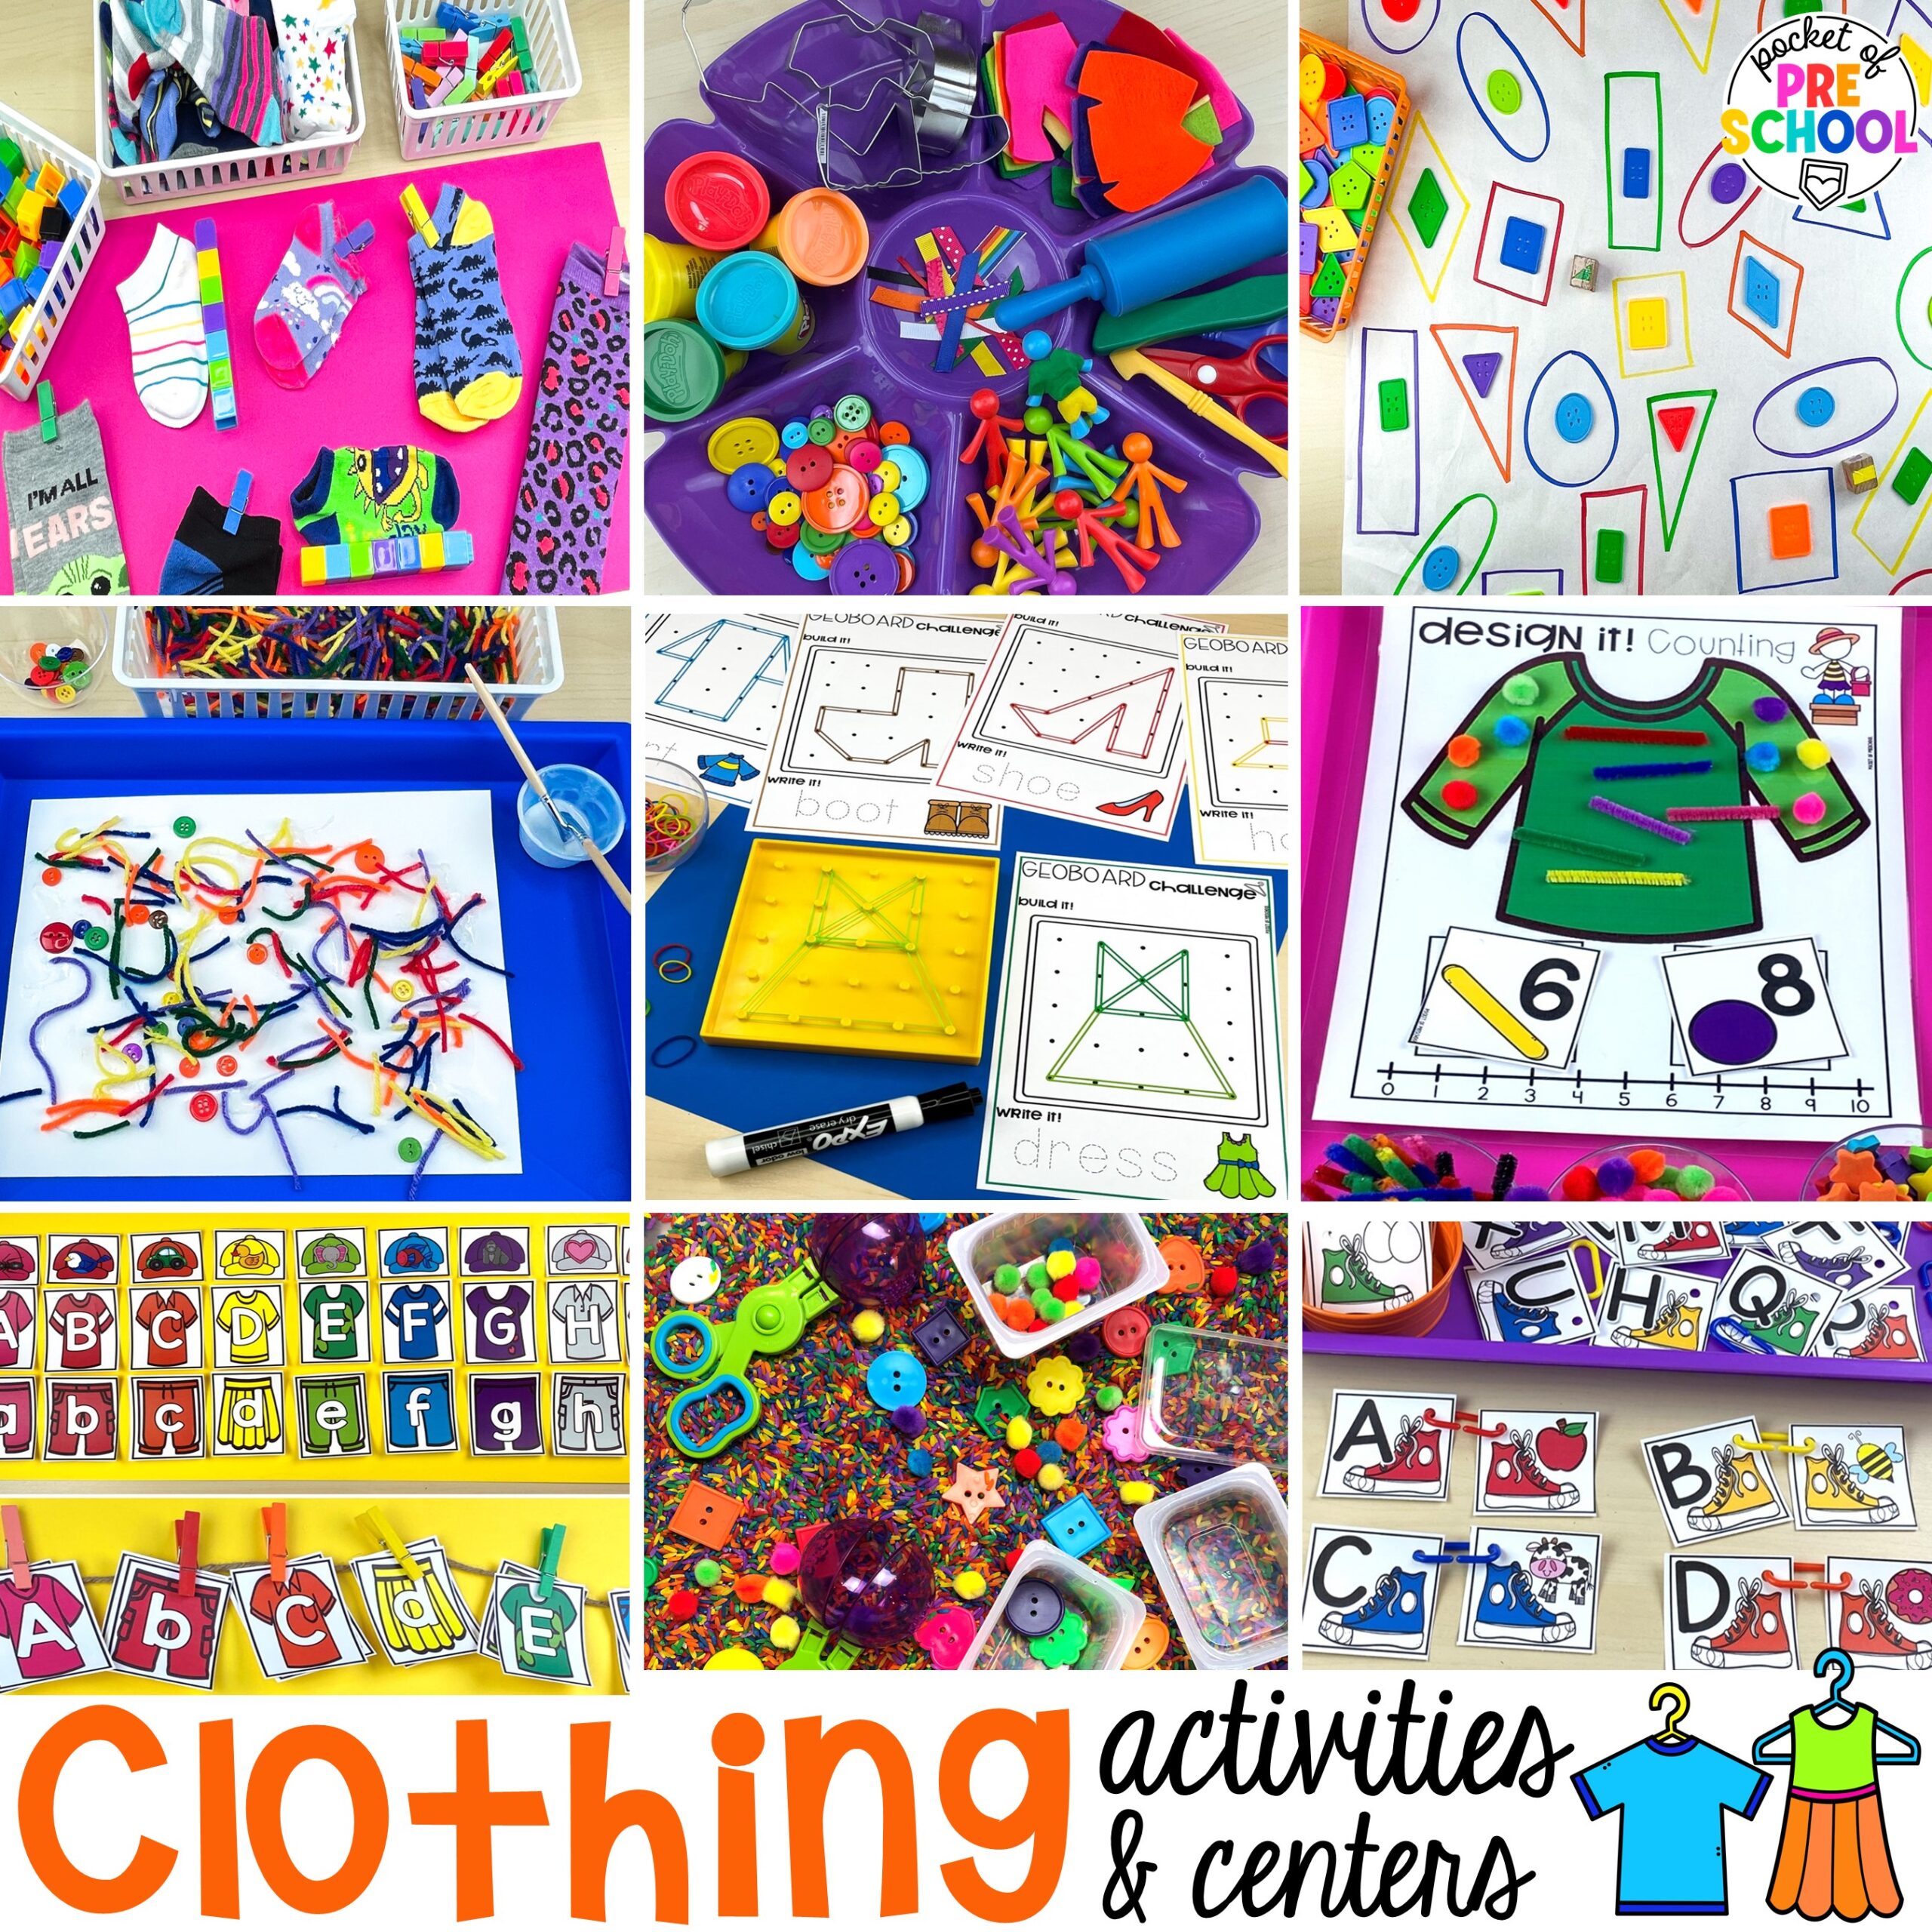 Clothing-themed activities and centers for preschool, pre-k, and kindergarten students. This is a great theme for working on colors, patterns, sorting, and matching!